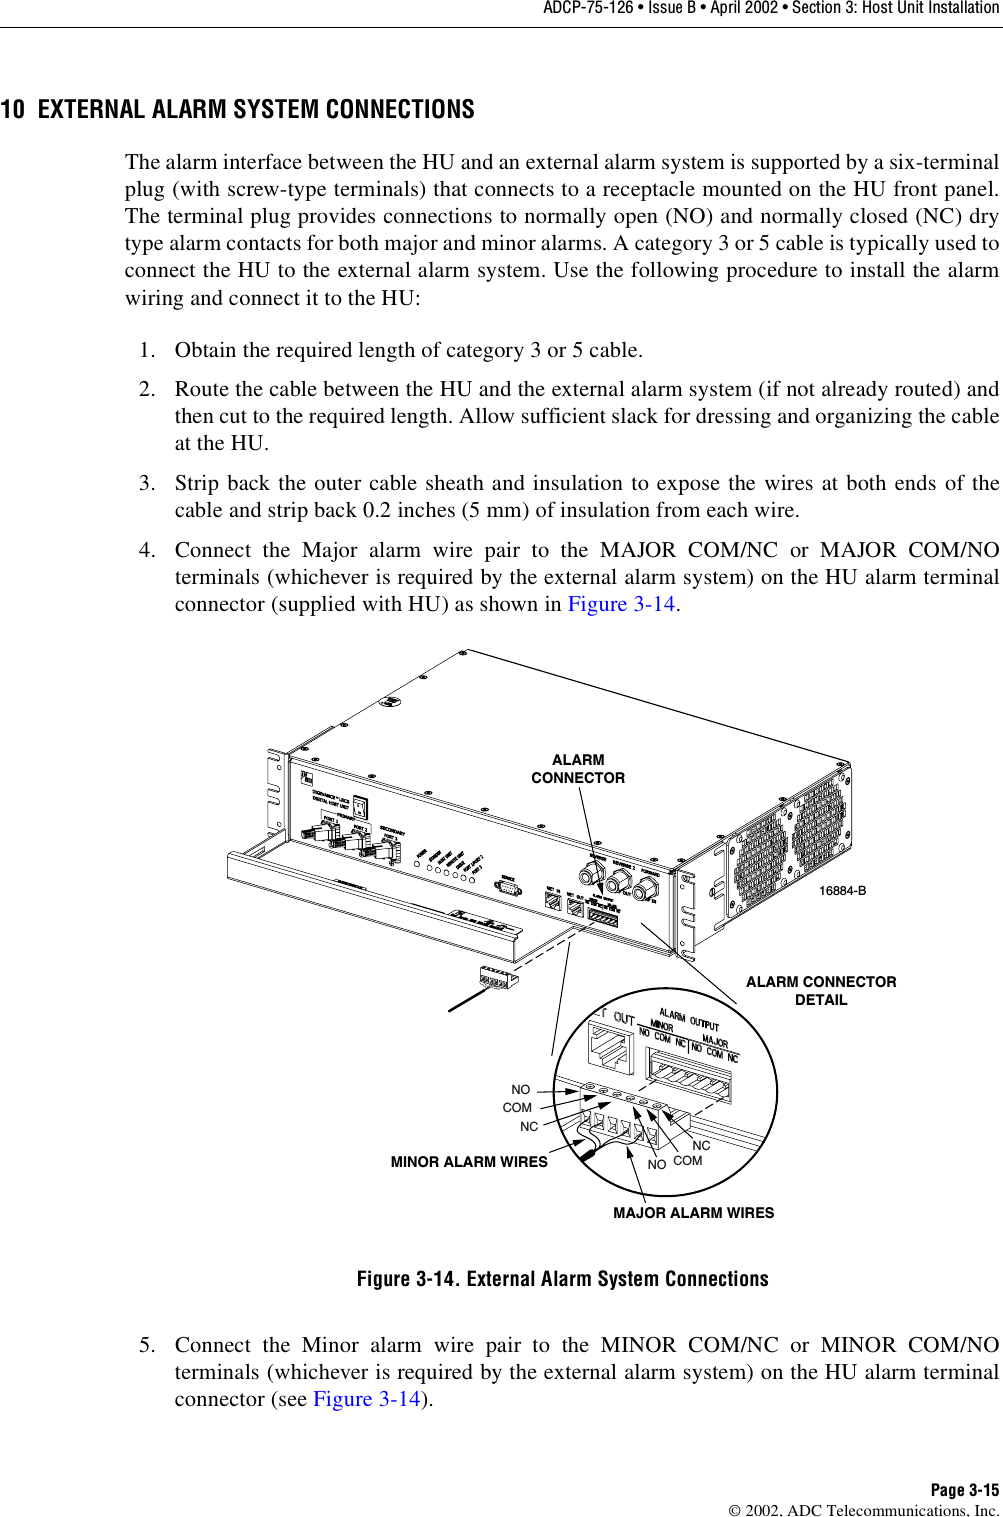 ADCP-75-126 • Issue B • April 2002 • Section 3: Host Unit InstallationPage 3-15©2002, ADC Telecommunications, Inc.10 EXTERNAL ALARM SYSTEM CONNECTIONSThe alarm interface between the HU and an external alarm system is supported by asix-terminalplug (with screw-type terminals) that connects to areceptacle mounted on the HU front panel.The terminal plug provides connections to normally open (NO) and normally closed (NC) drytype alarm contacts for both major and minor alarms. Acategory 3or 5cable is typically used toconnect the HU to the external alarm system. Use the following procedure to install the alarmwiring and connect it to the HU:1. Obtain the required length of category 3or 5cable.2. Route the cable between the HU and the external alarm system (if not already routed) andthen cut to the required length. Allow sufficient slack for dressing and organizing the cableat the HU.3. Strip back the outer cable sheath and insulation to expose the wires at both ends of thecable and strip back 0.2 inches (5 mm) of insulation from each wire.4. Connect the Major alarm wire pair to the MAJOR COM/NC or MAJOR COM/NOterminals (whichever is required by the external alarm system) on the HU alarm terminalconnector (supplied with HU) as shown in Figure 3-14.Figure 3-14. External Alarm System Connections5. Connect the Minor alarm wire pair to the MINOR COM/NC or MINOR COM/NOterminals (whichever is required by the external alarm system) on the HU alarm terminalconnector (see Figure 3-14).16884-BALARMCONNECTORMAJOR ALARM WIRESMINOR ALARM WIRESALARM CONNECTORDETAILNOCOMNCNO COMNC